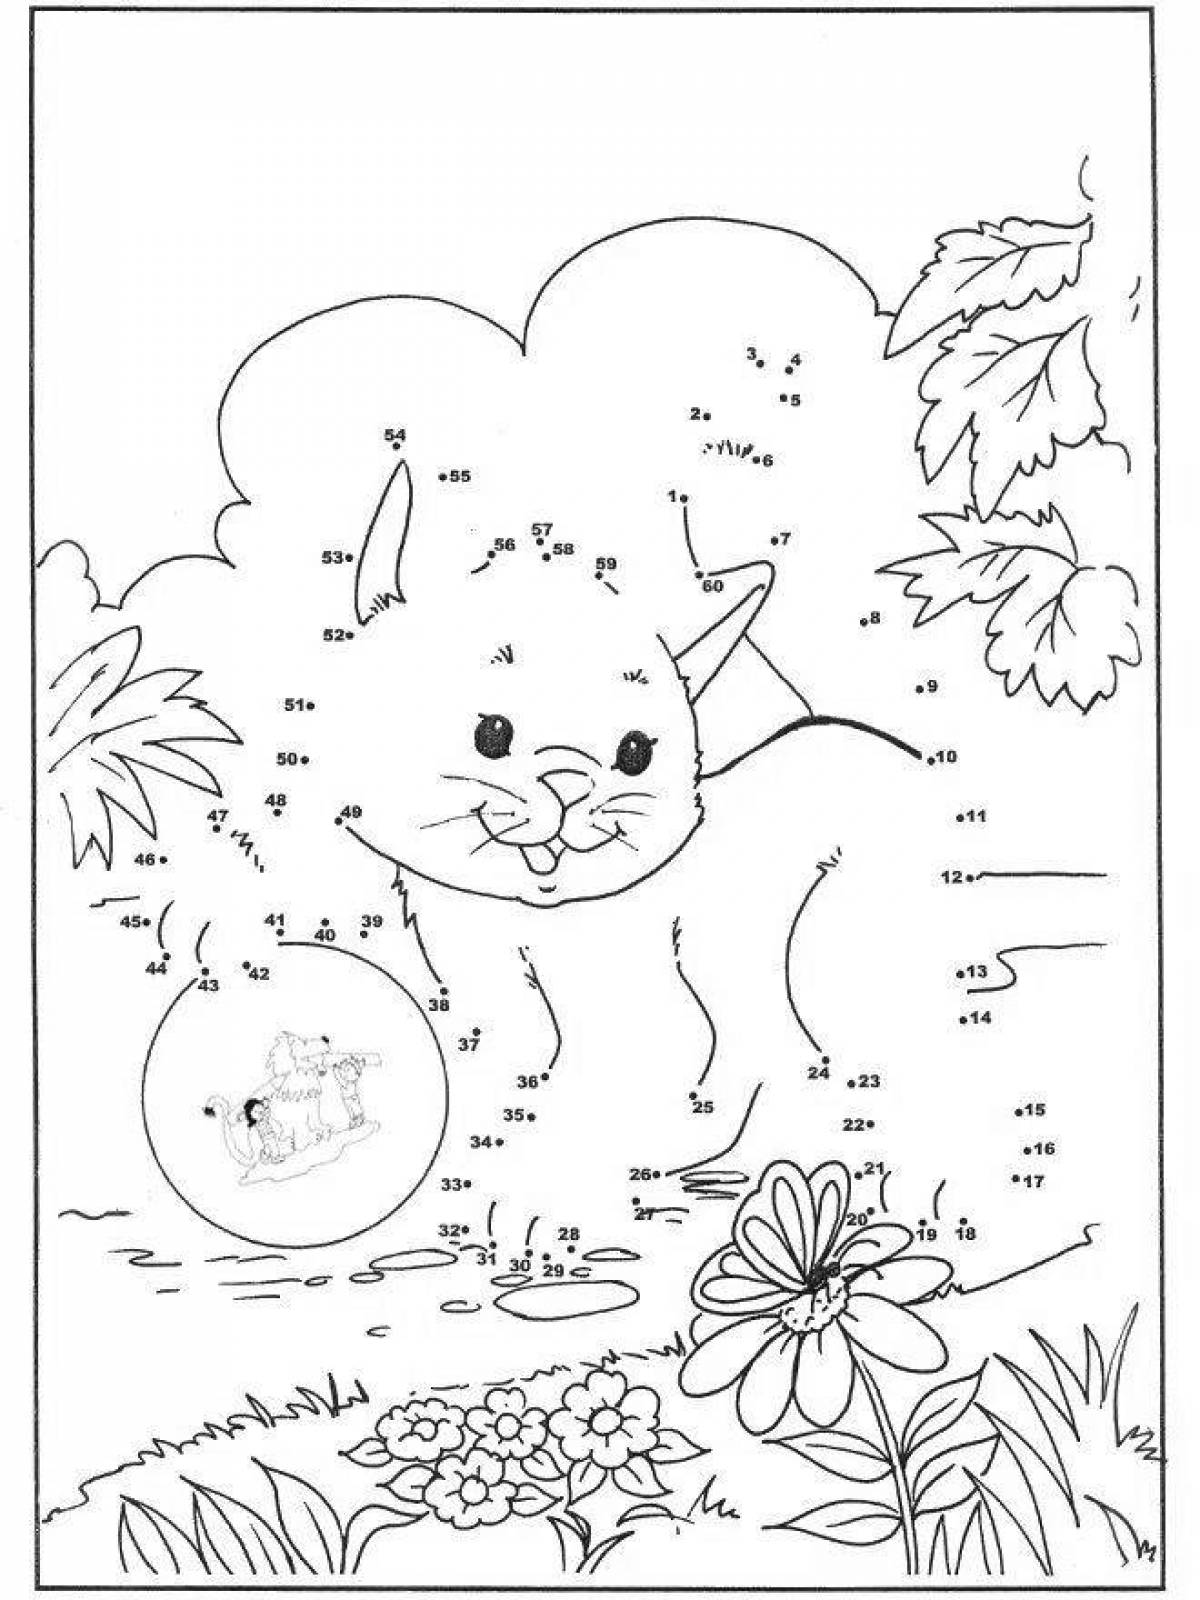 Cute cat coloring by numbers